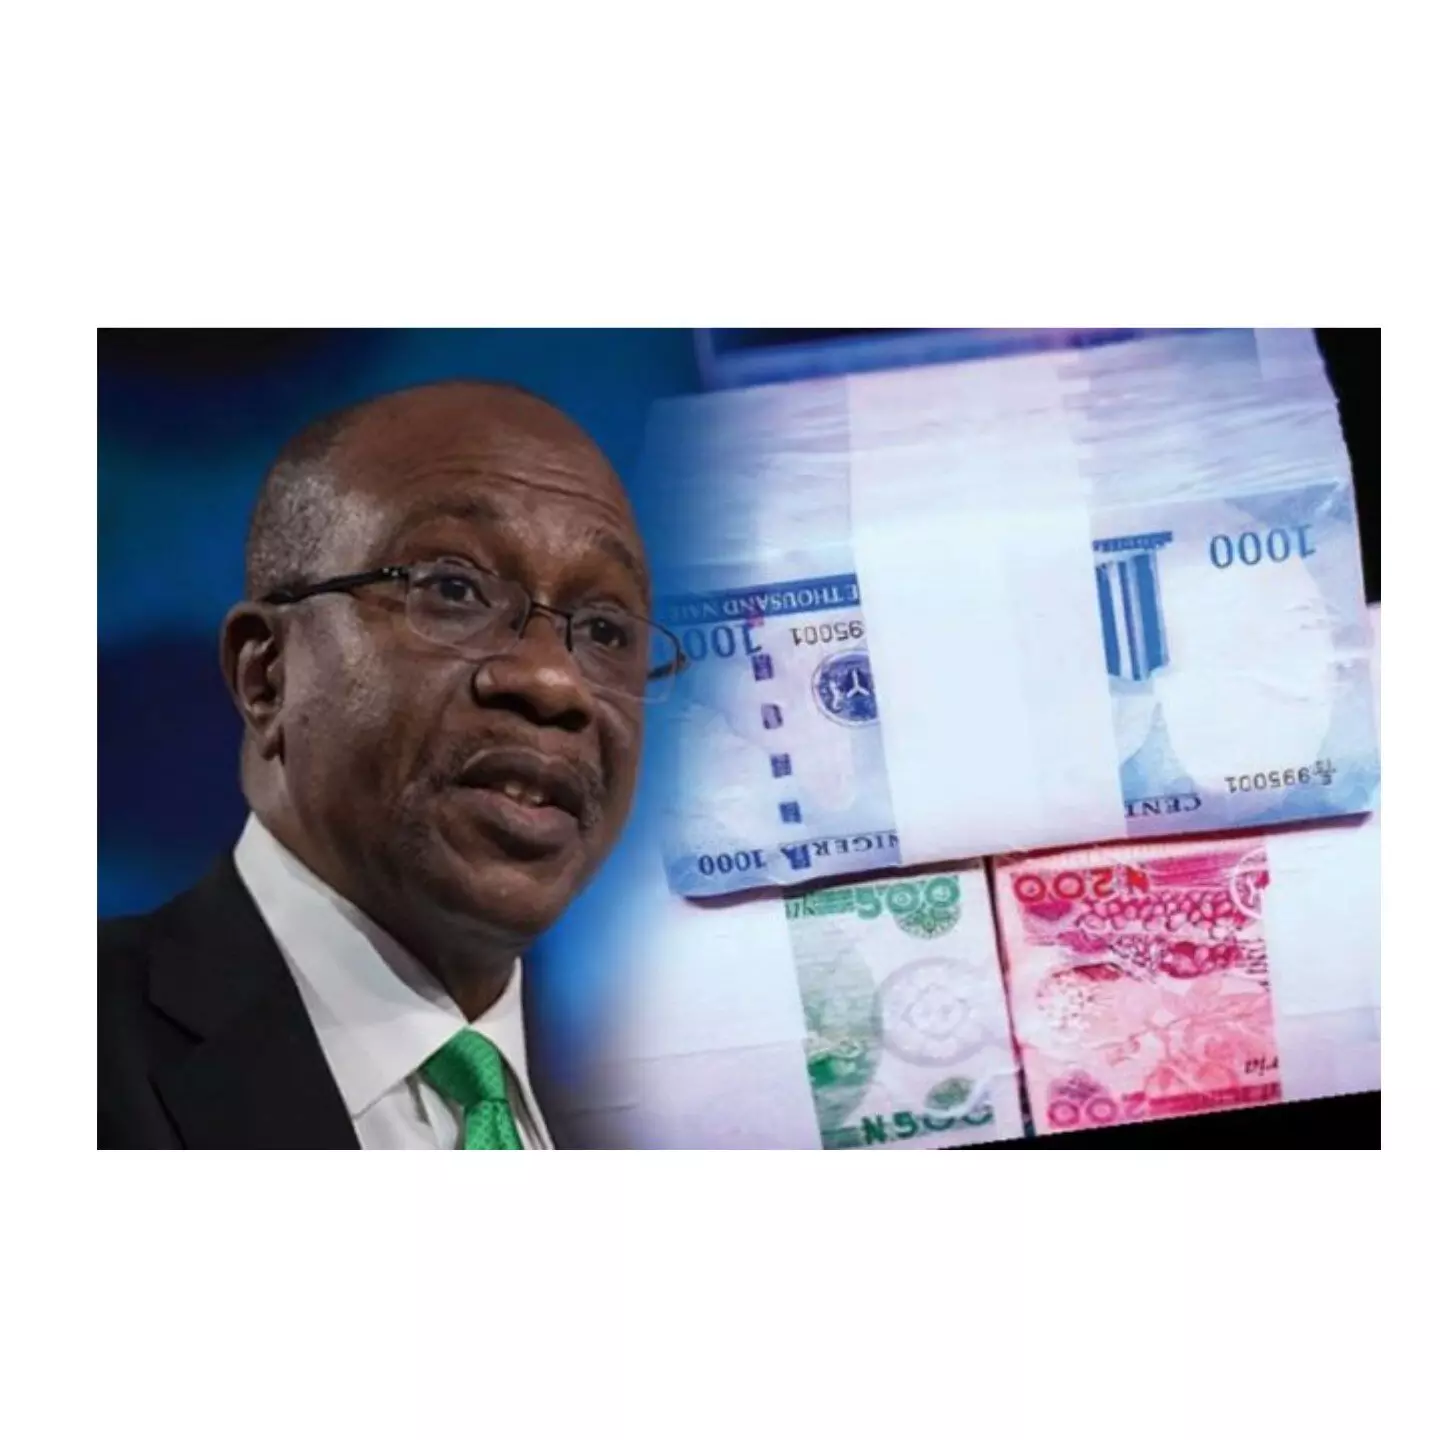 Group urges CBN to publish redesign naira note disbursements daily